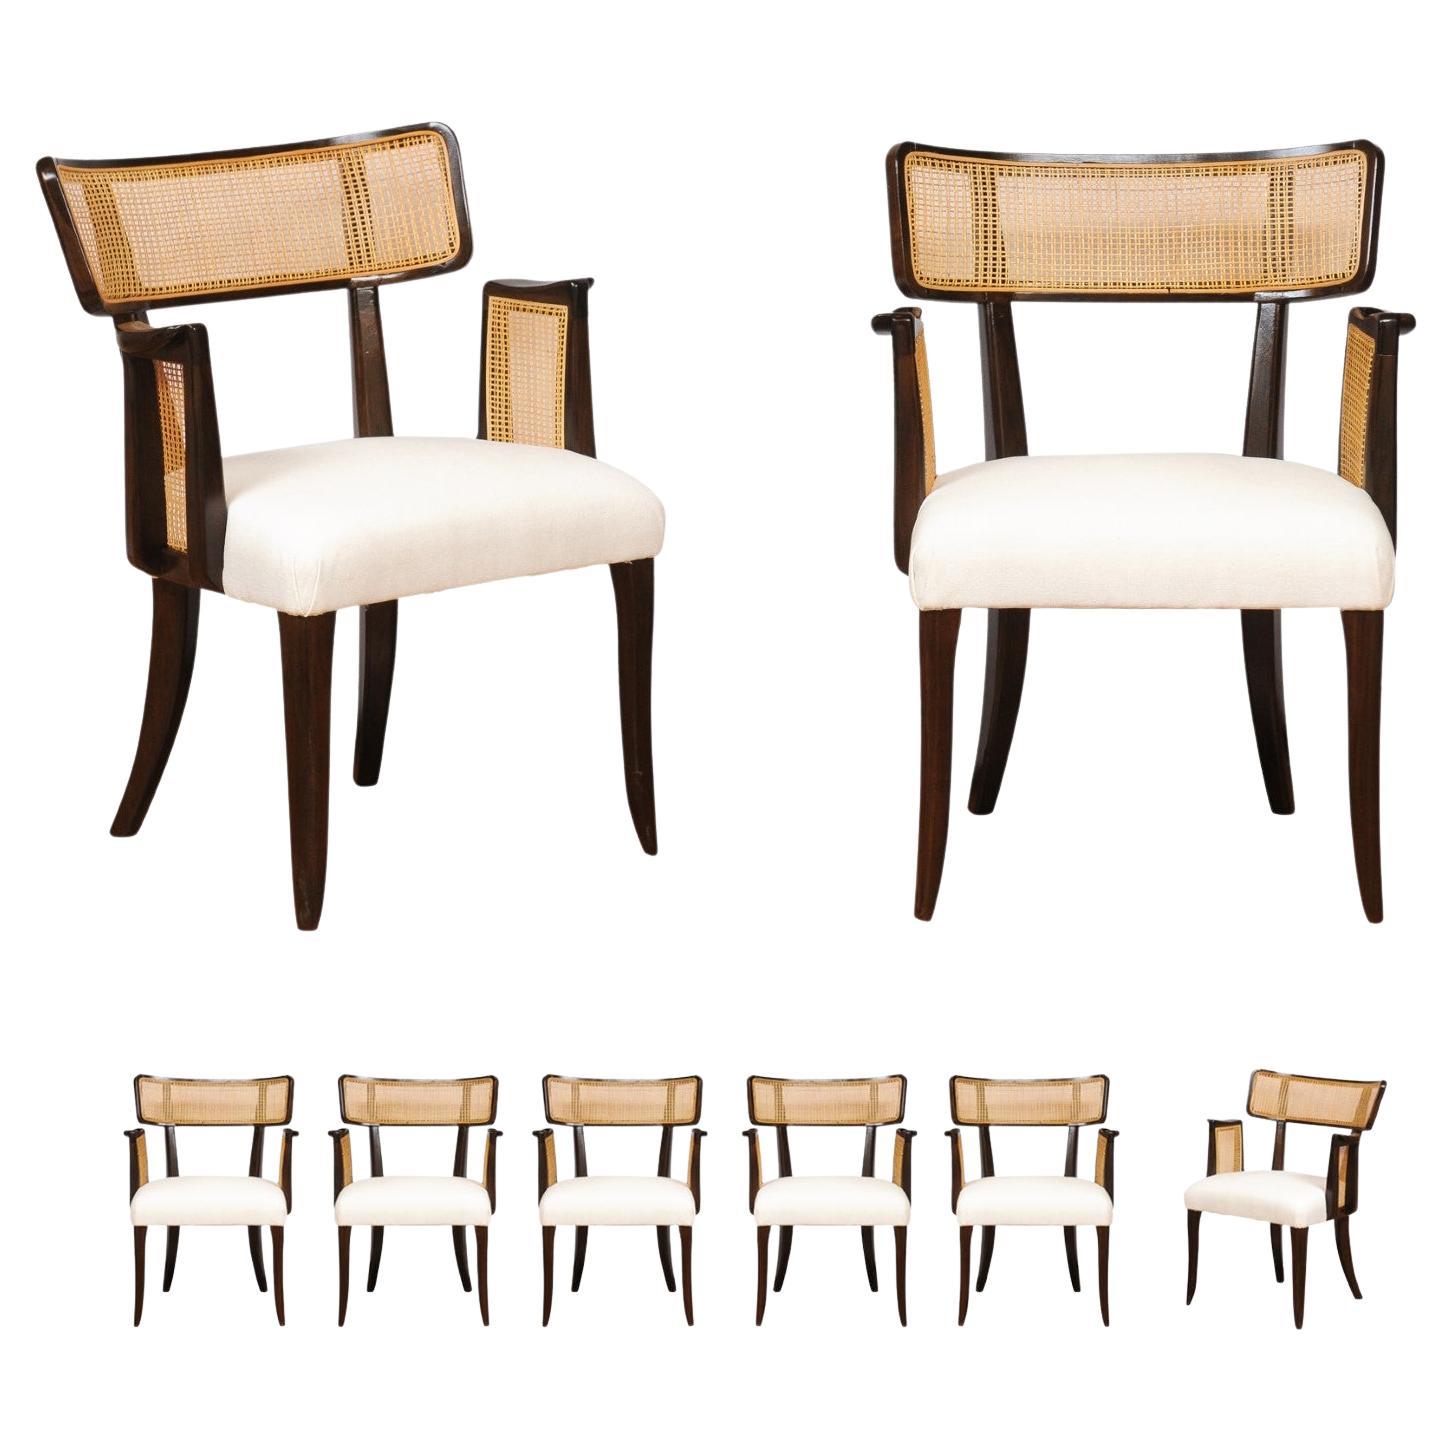 Stellar Set of 8 Modern Cane Arm Dining Chairs by Wormley for Dunbar For Sale